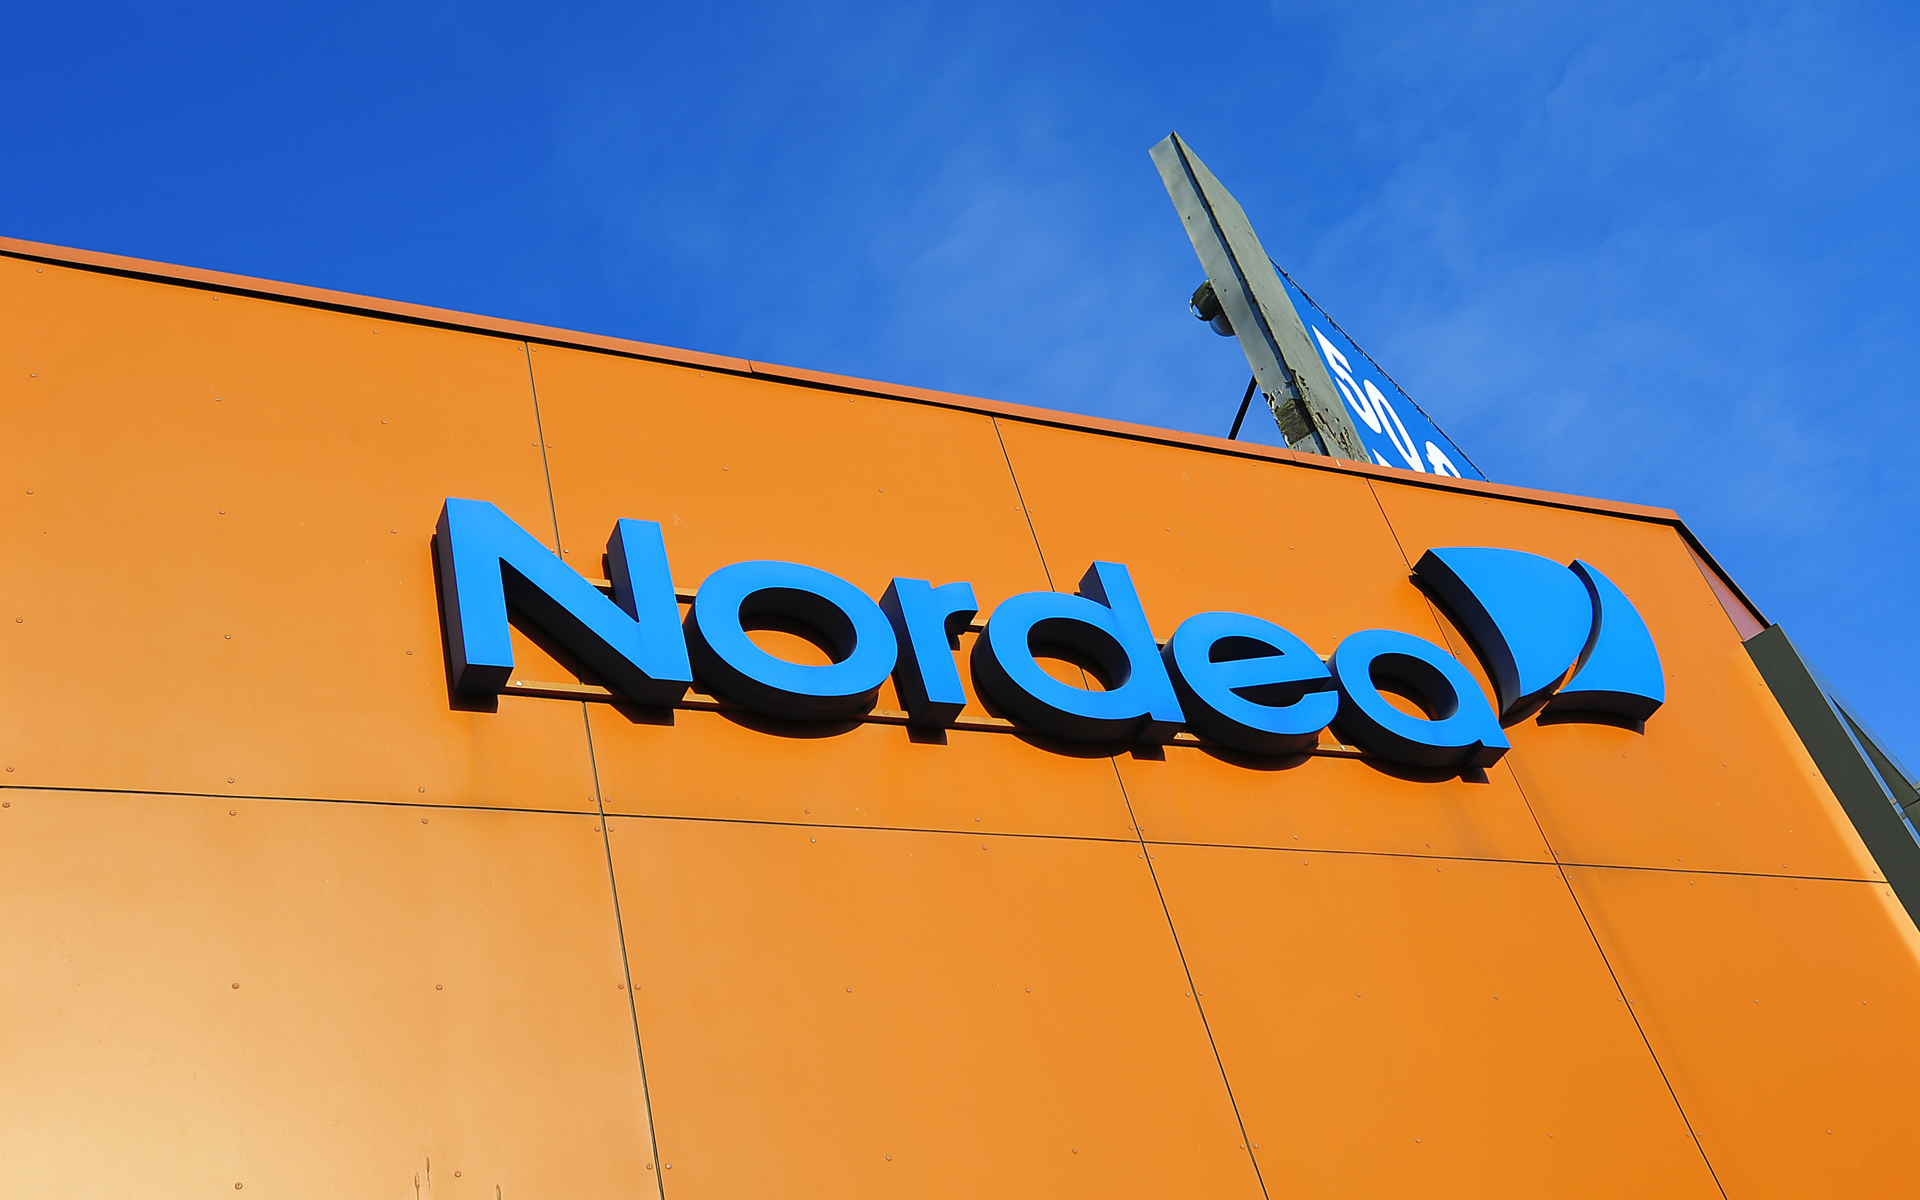 Nordea in Money Laundering Scandal After Calling Bitcoin ‘High-Risk’ for Money Laundering